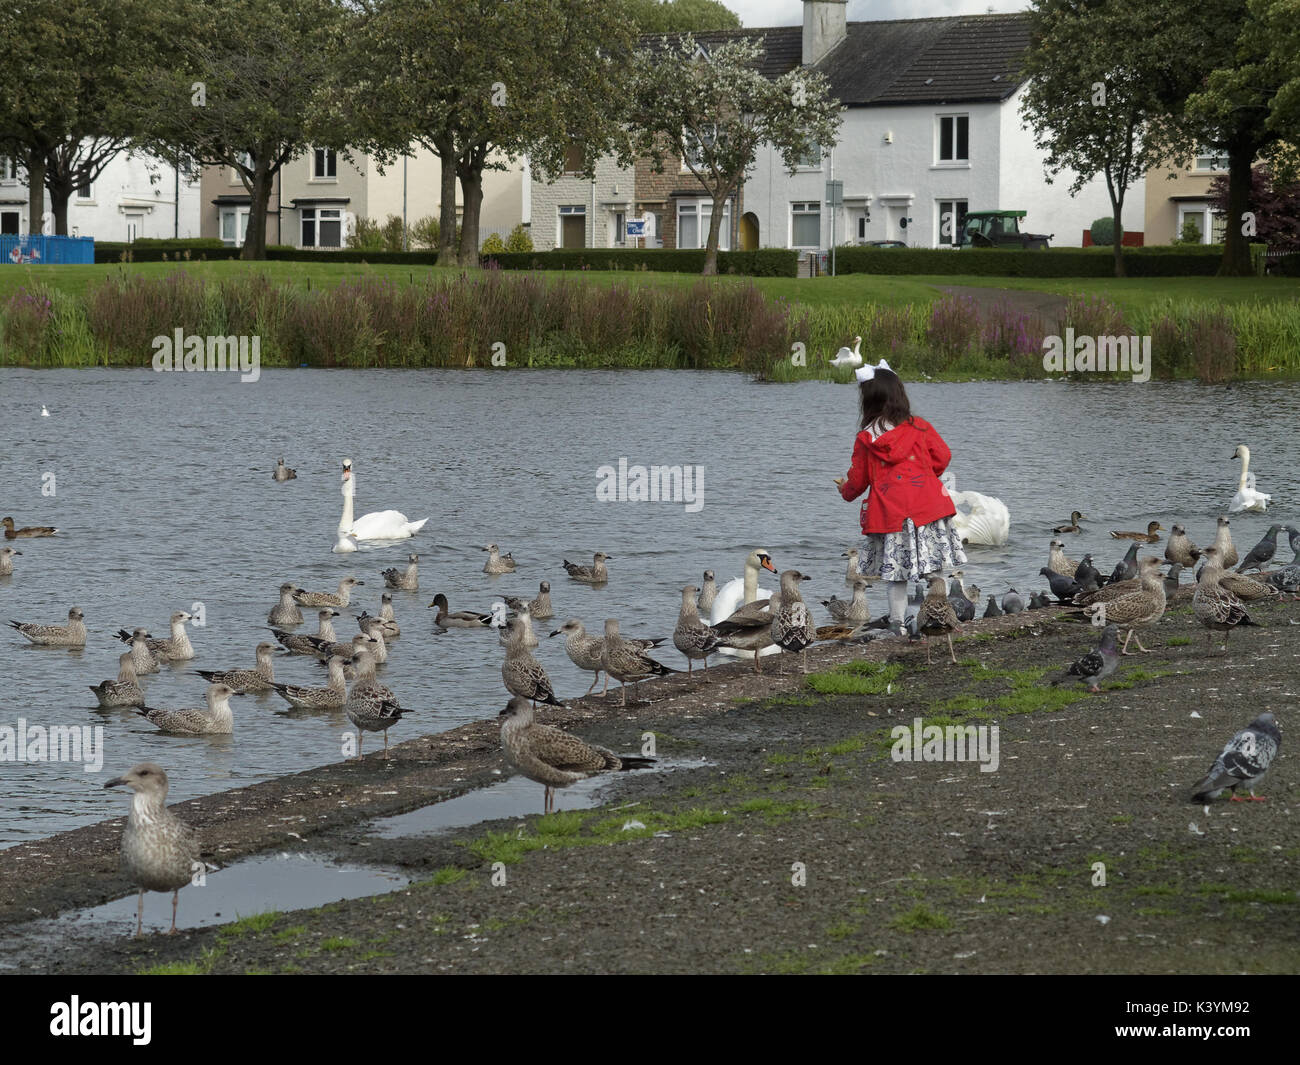 little girl in a red jacket feeding the birds in Knightswood park  Glasgow pond, swans seagulls Stock Photo